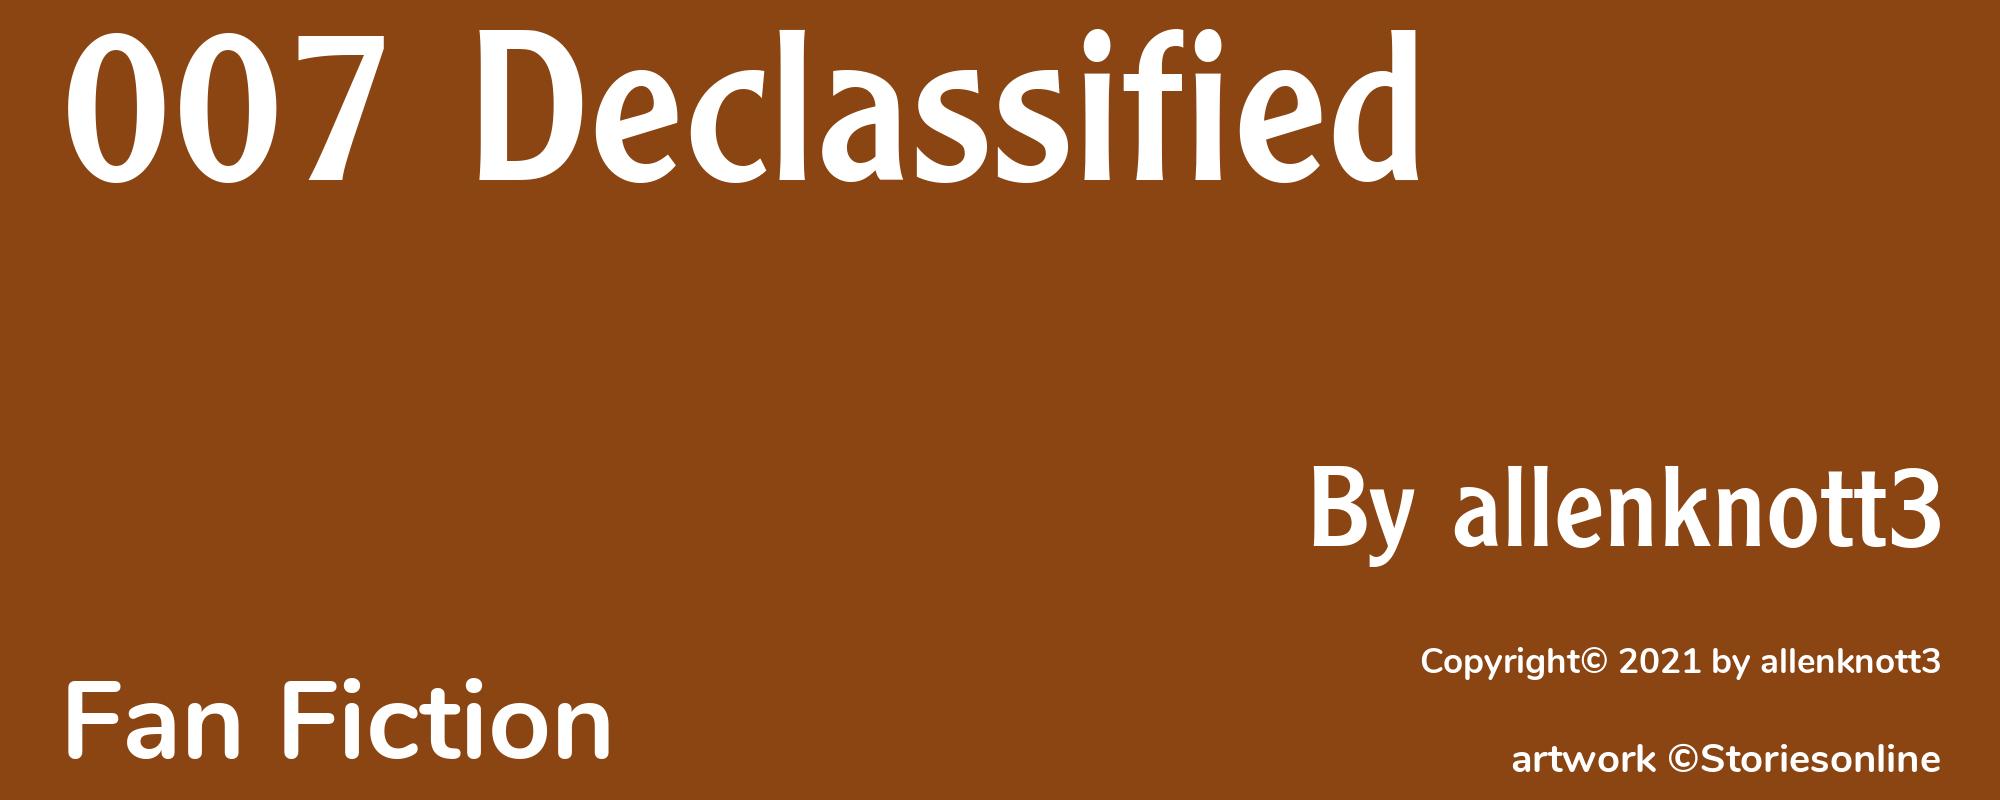 007 Declassified - Cover